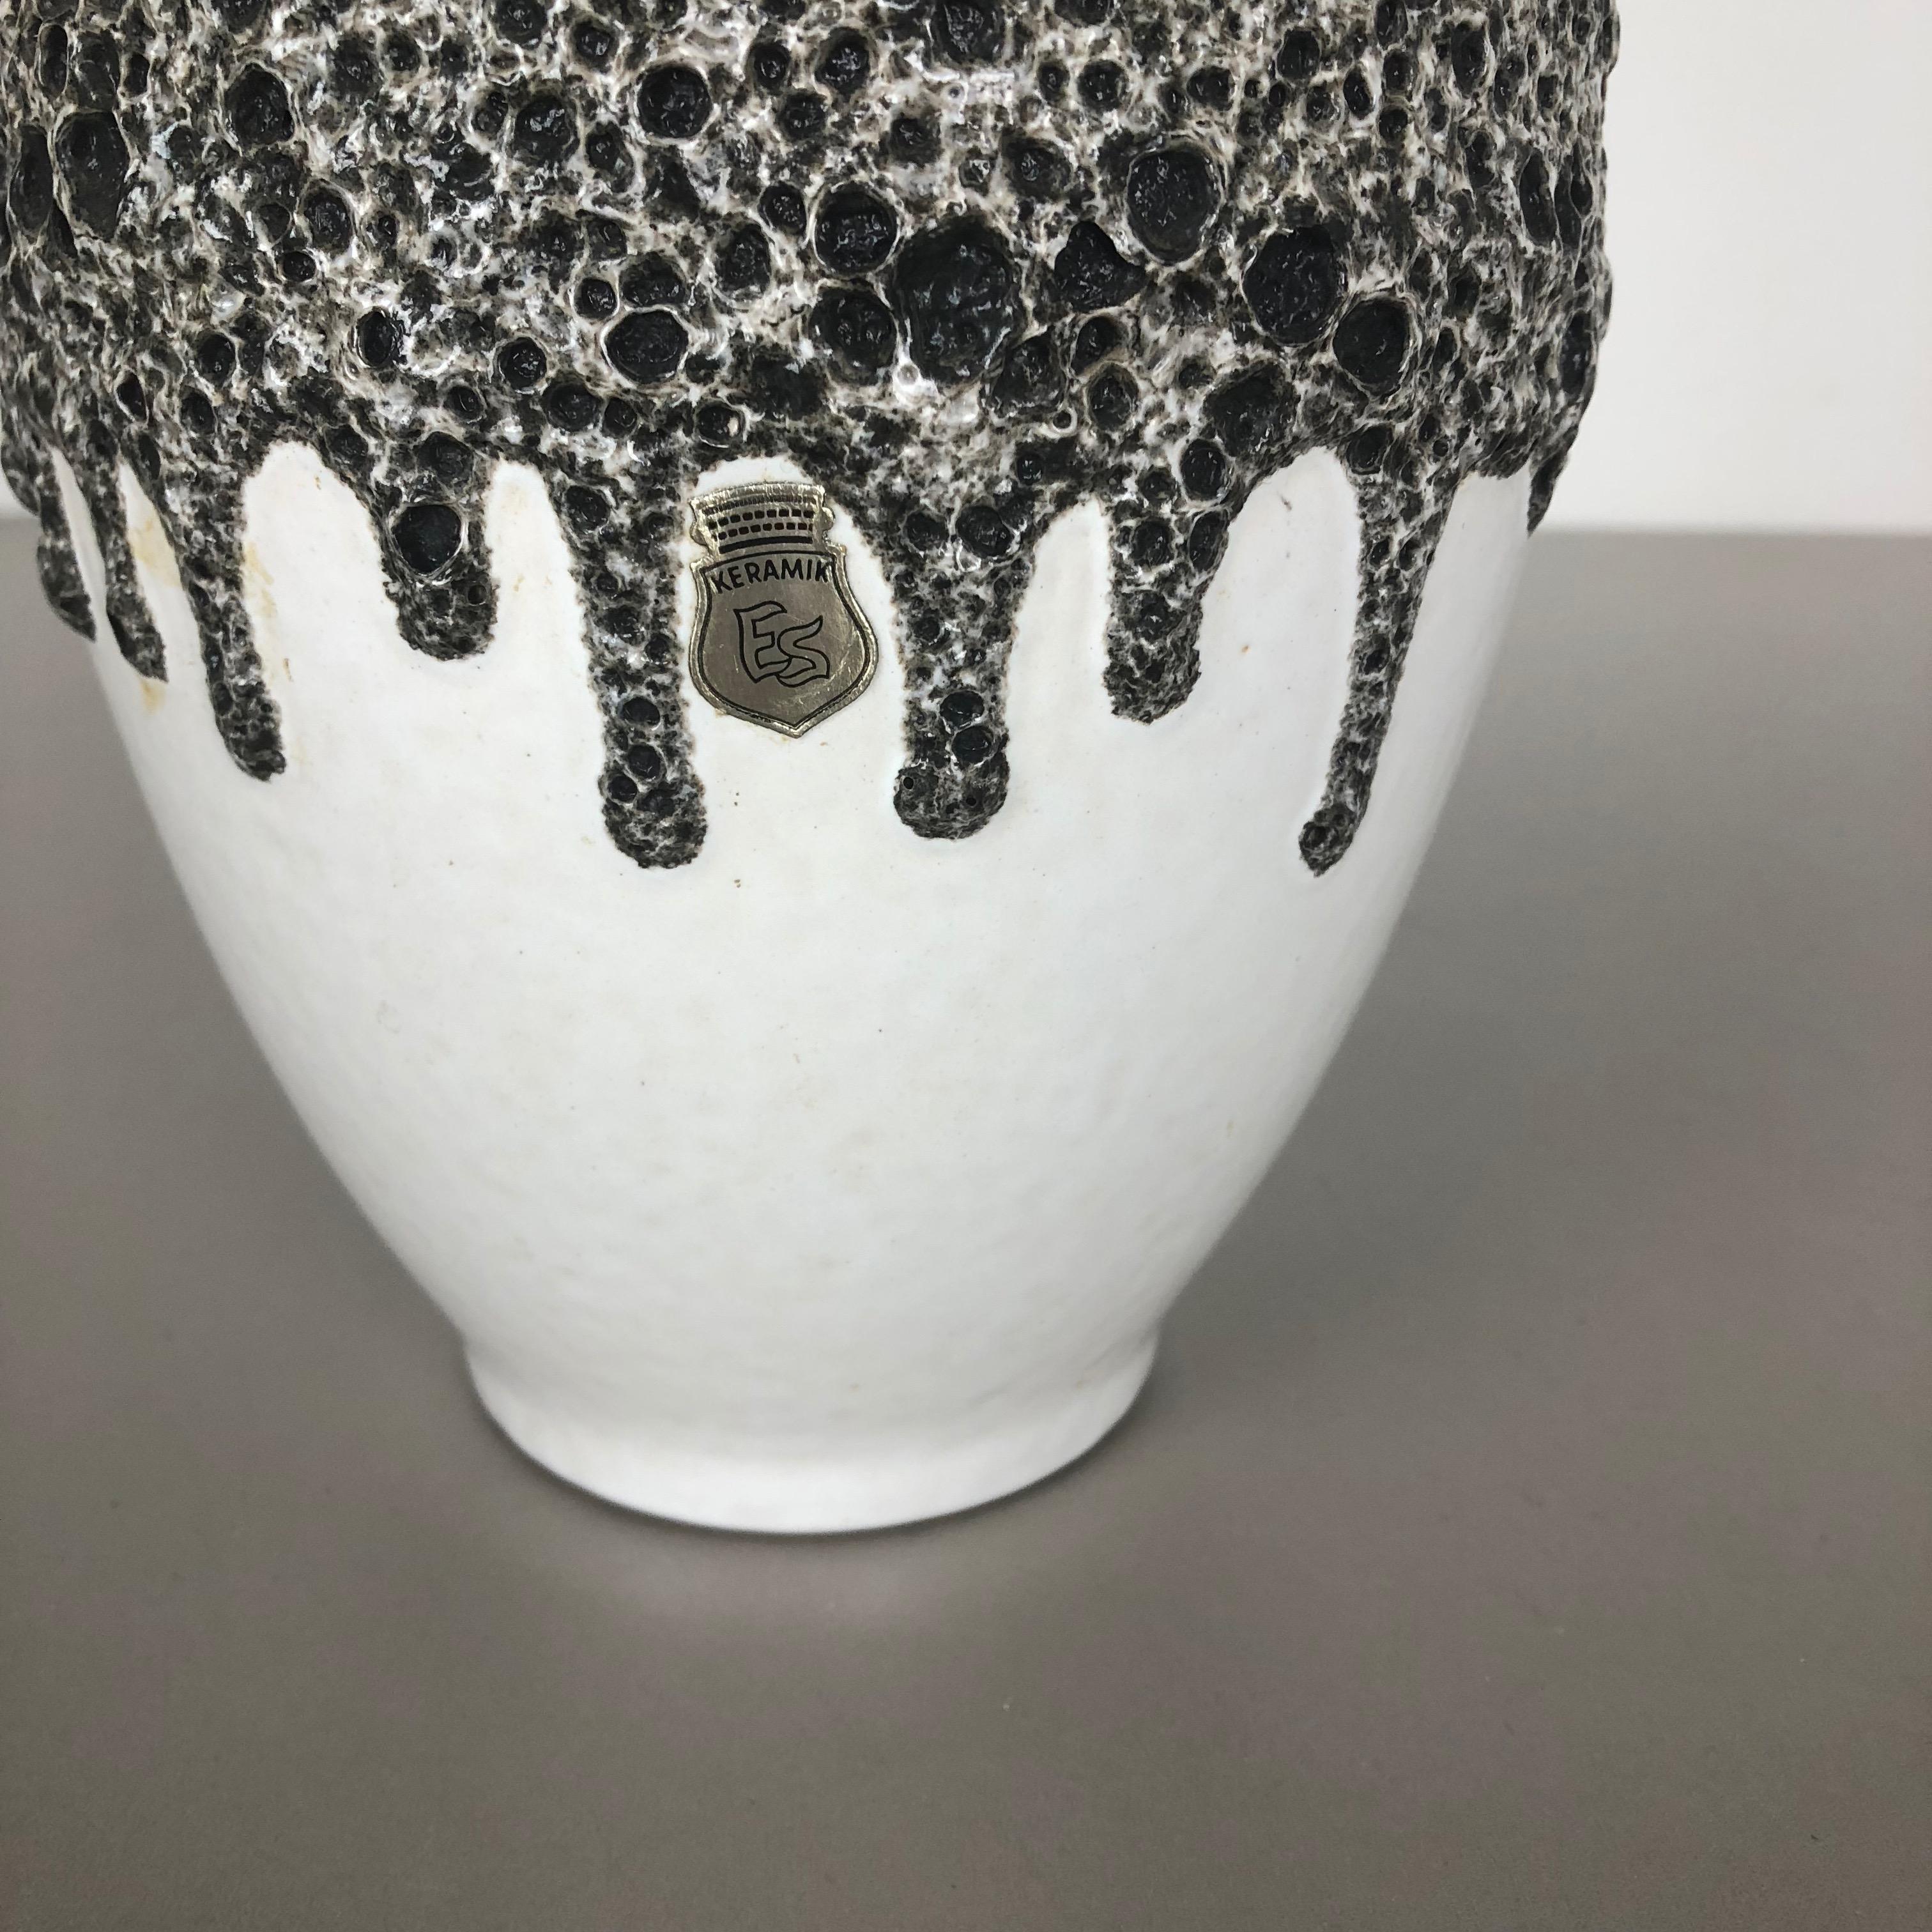 Vintage Pottery Fat Lava Vase Made by ES EMONS SÖHNE Ceramic, Germany, 1960s In Good Condition For Sale In Kirchlengern, DE